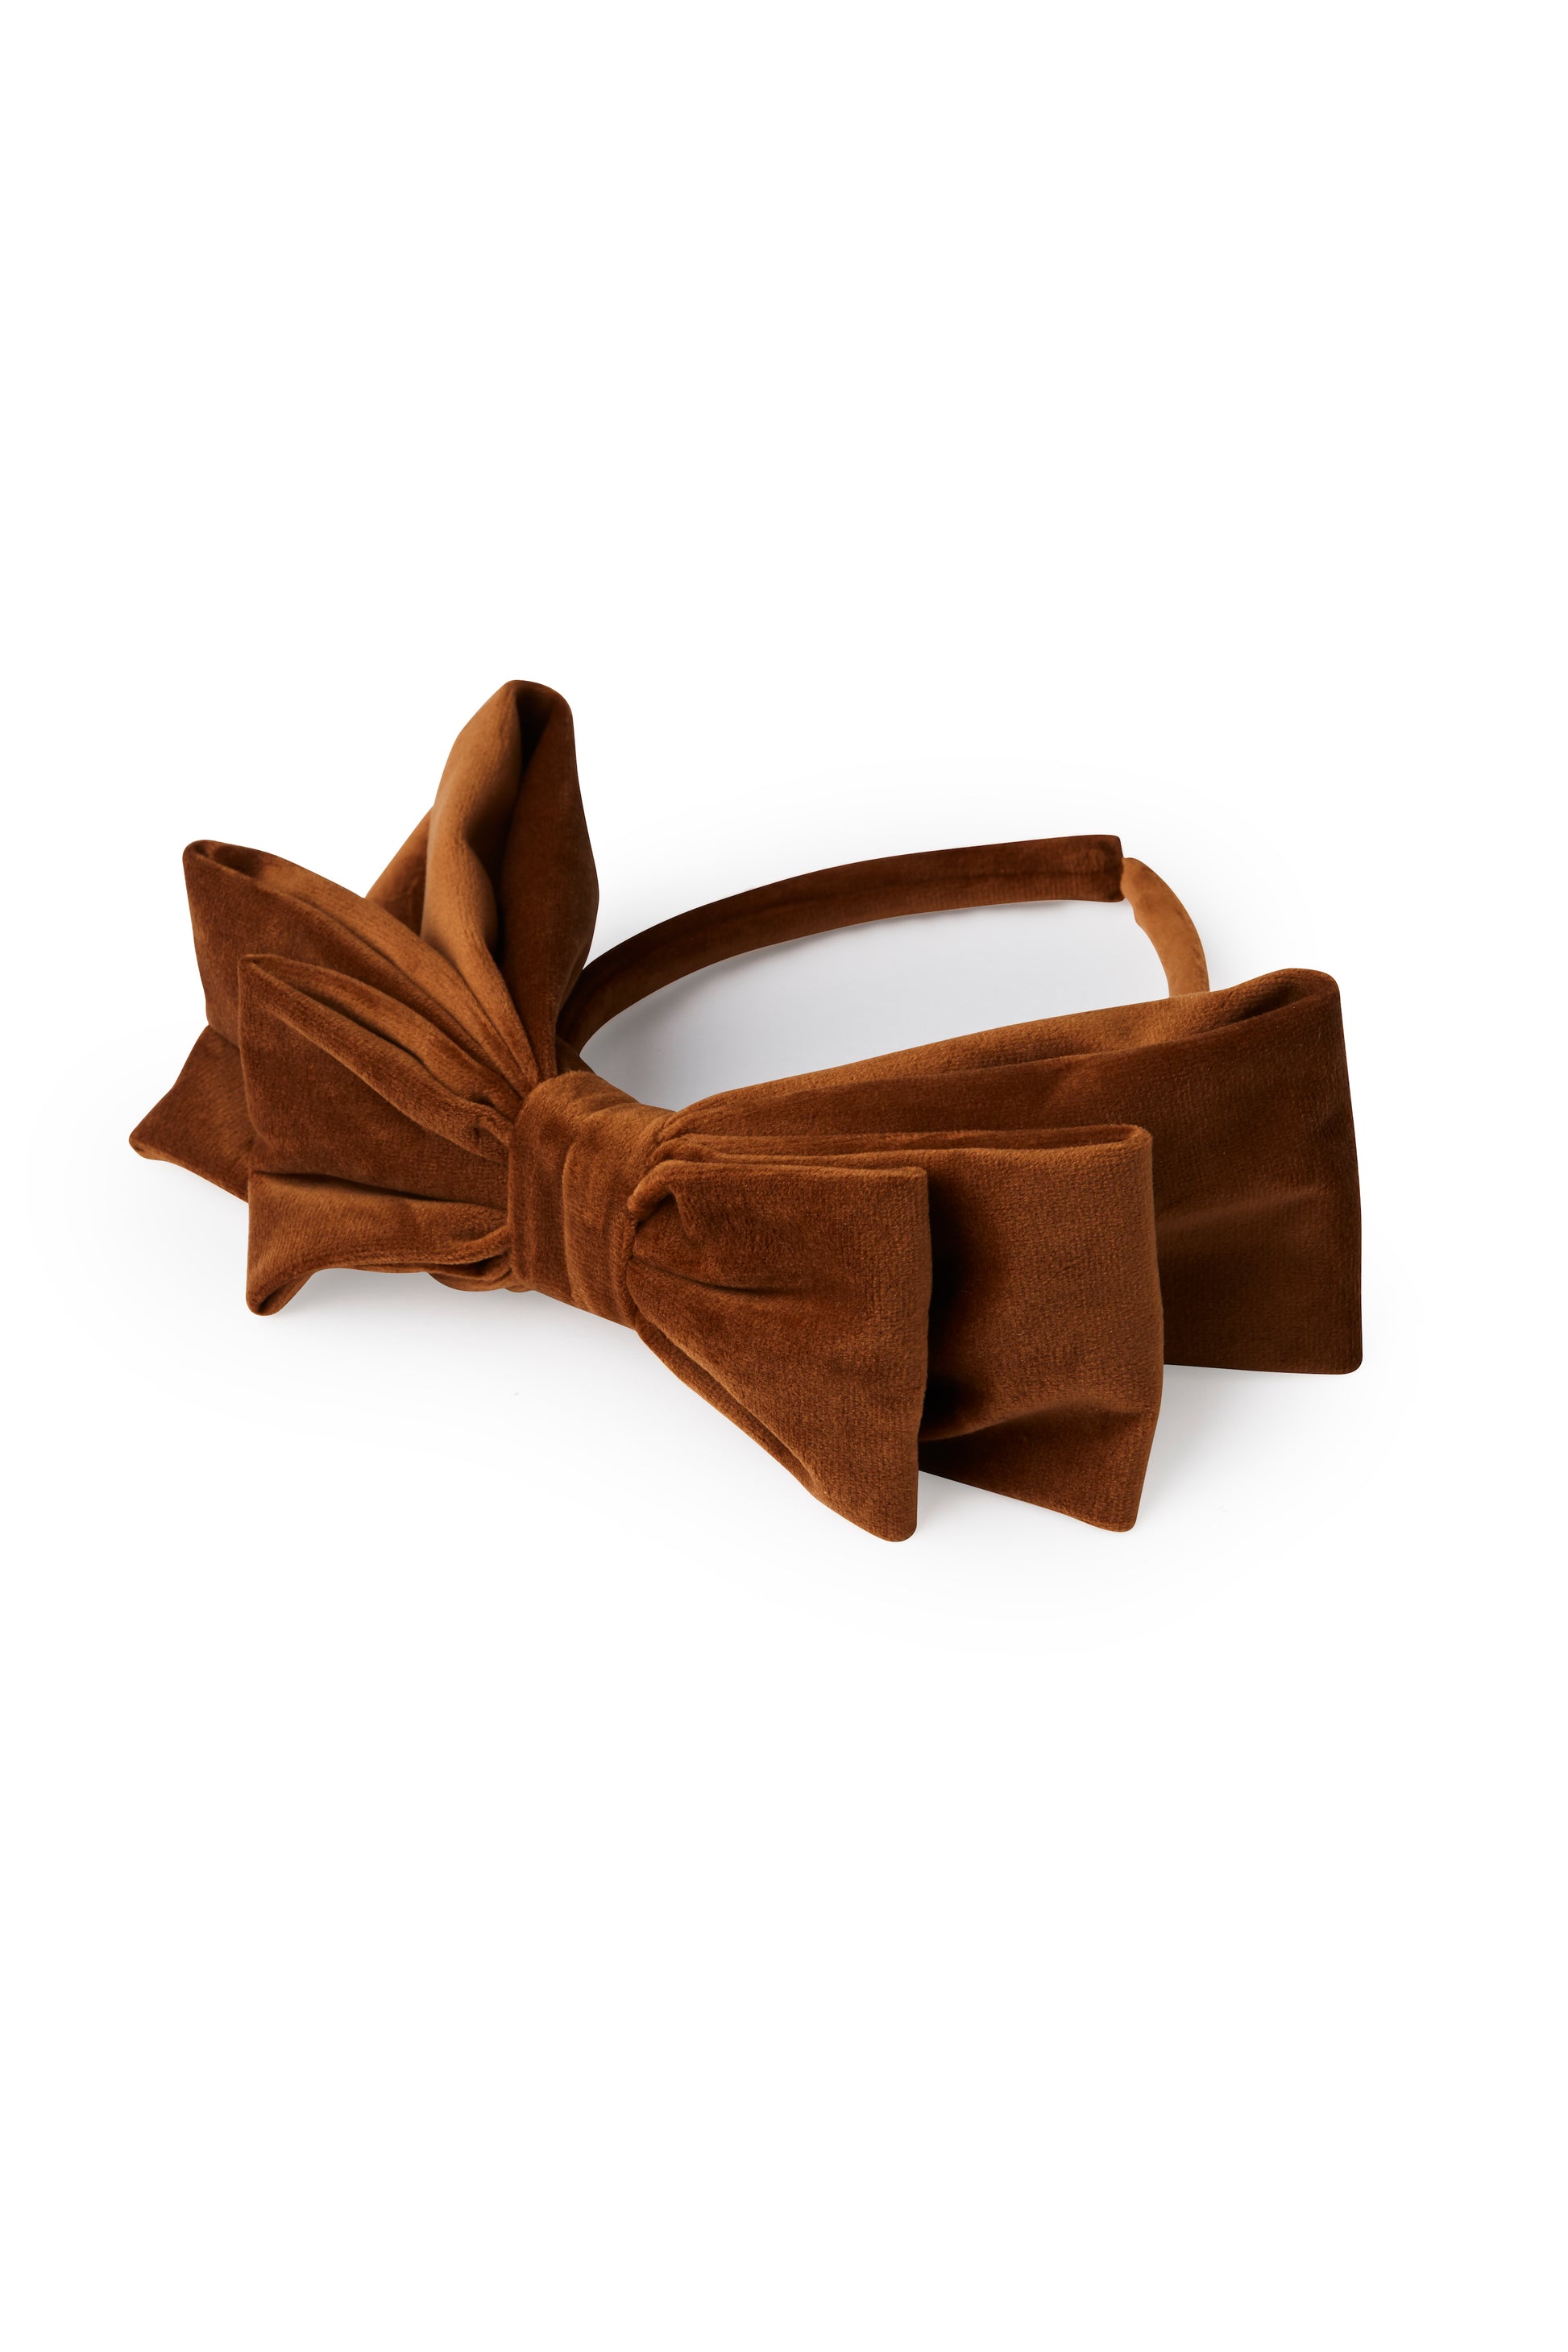 Headband with a big bow in brown color